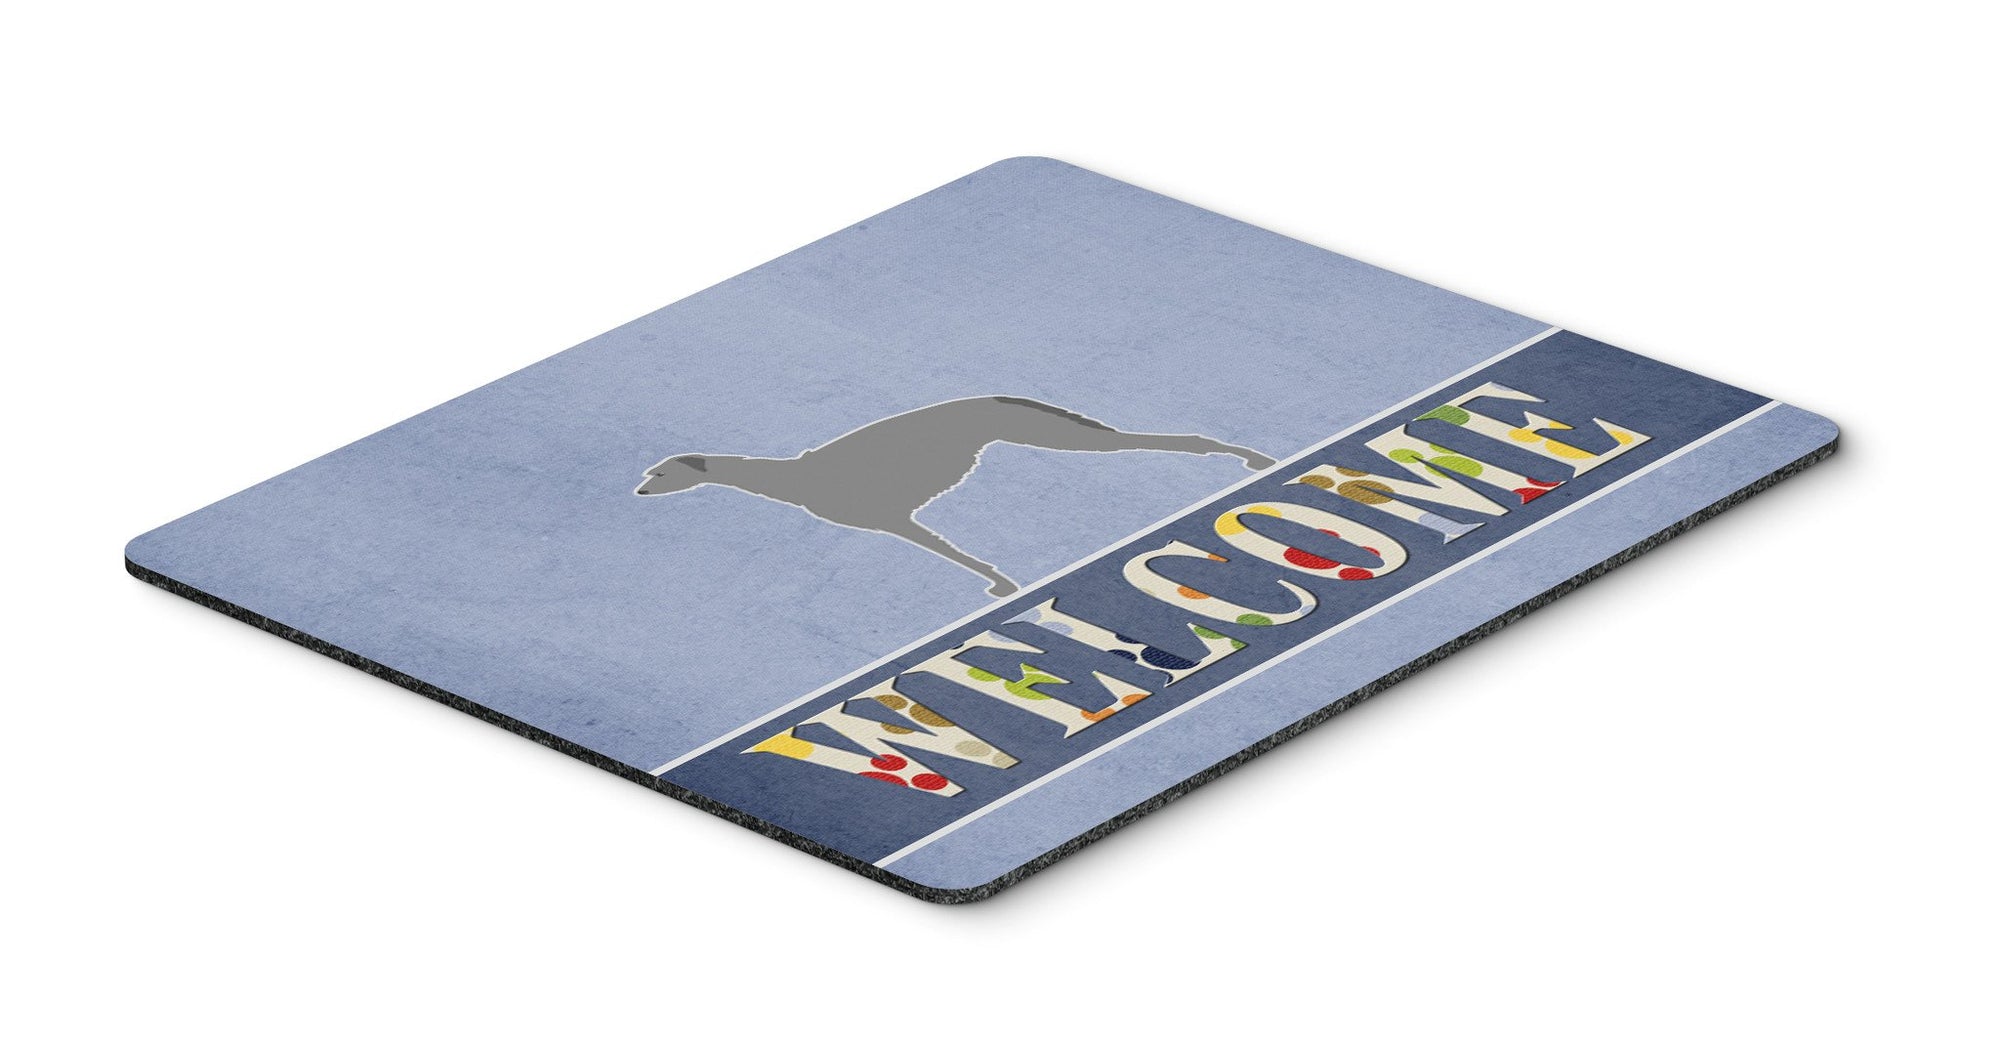 Scottish Deerhound Welcome Mouse Pad, Hot Pad or Trivet BB5500MP by Caroline's Treasures